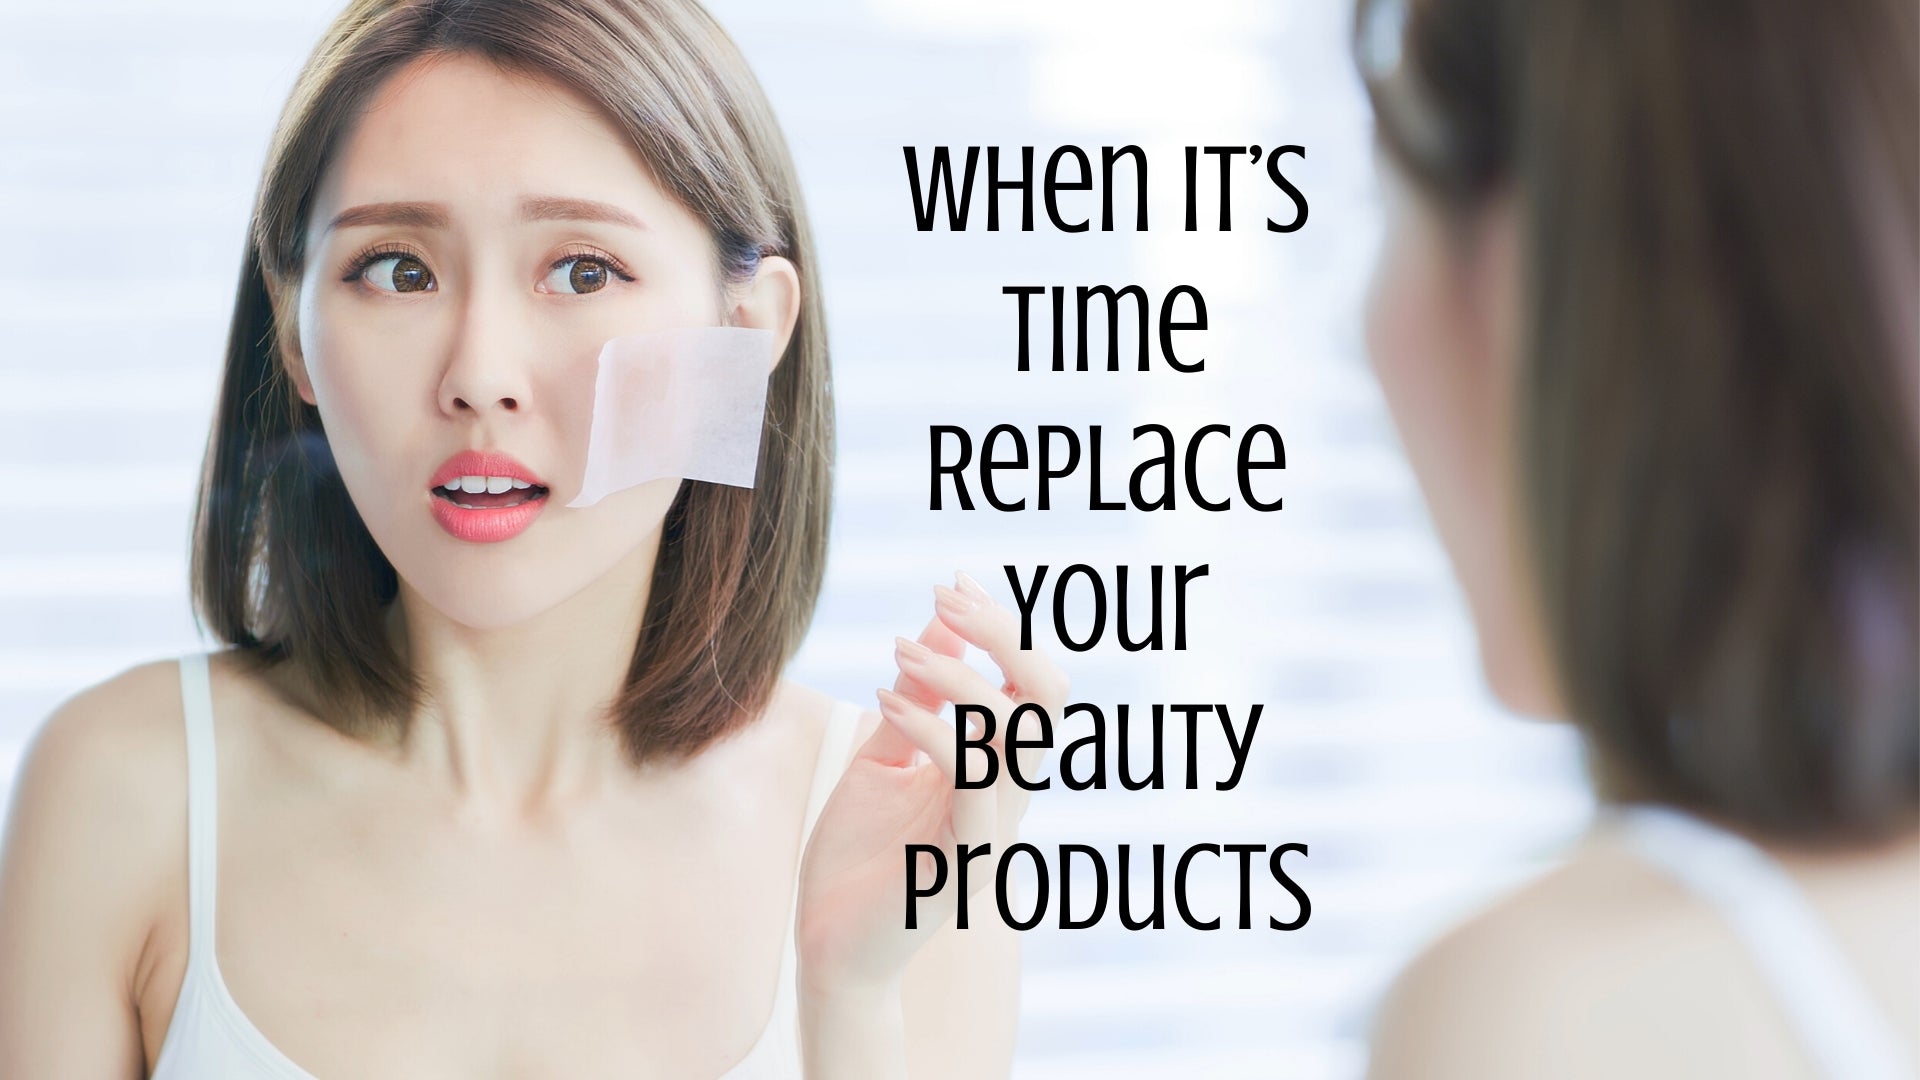 When It’s Time Replace Your Beauty Products